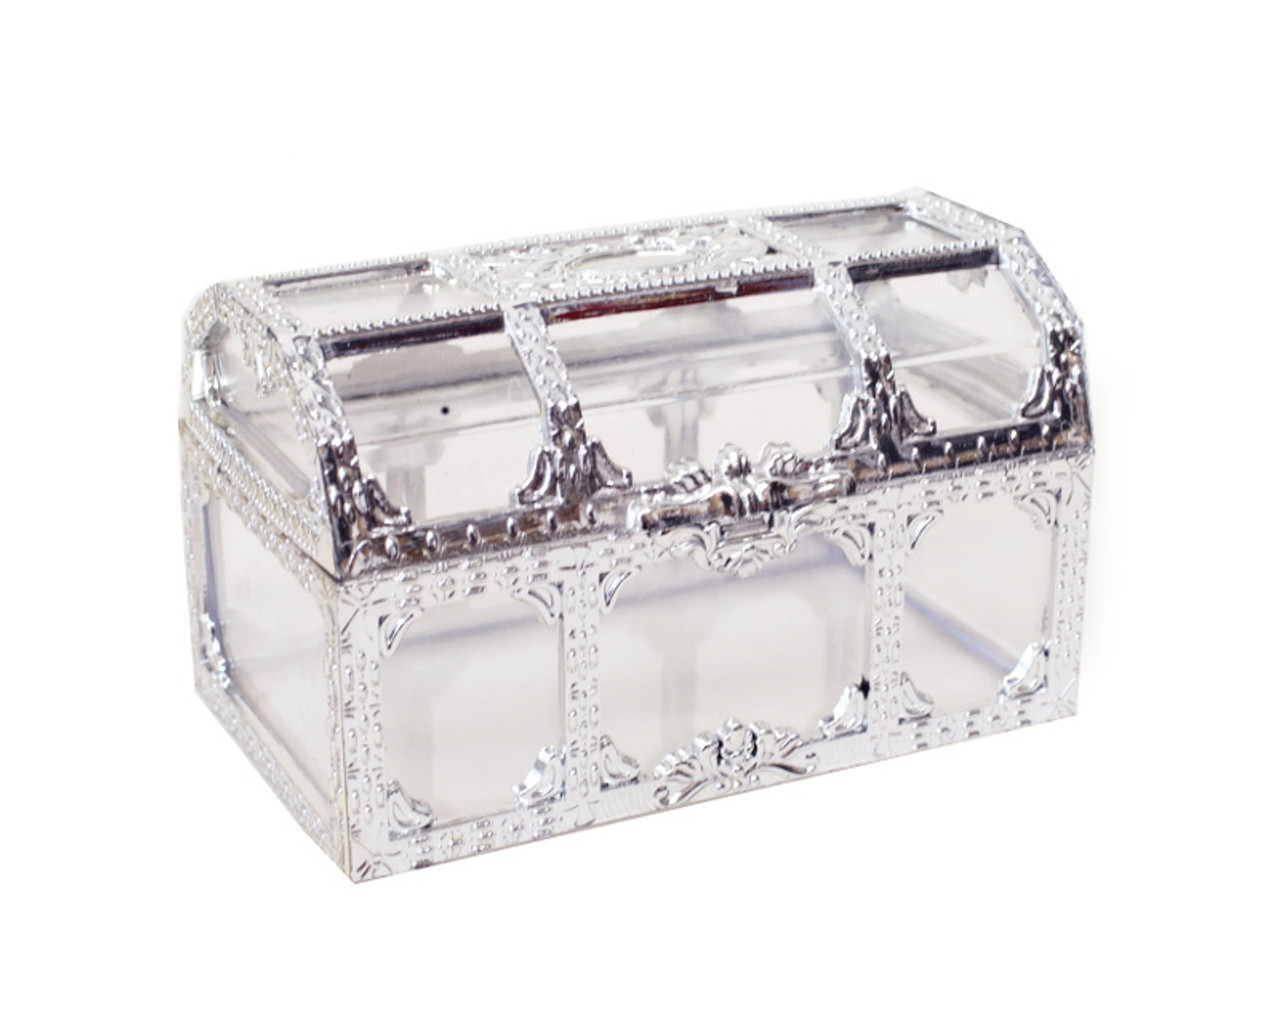 Small Clear Plastic Gold Treasure Chest Favor Containers (Set of 2)